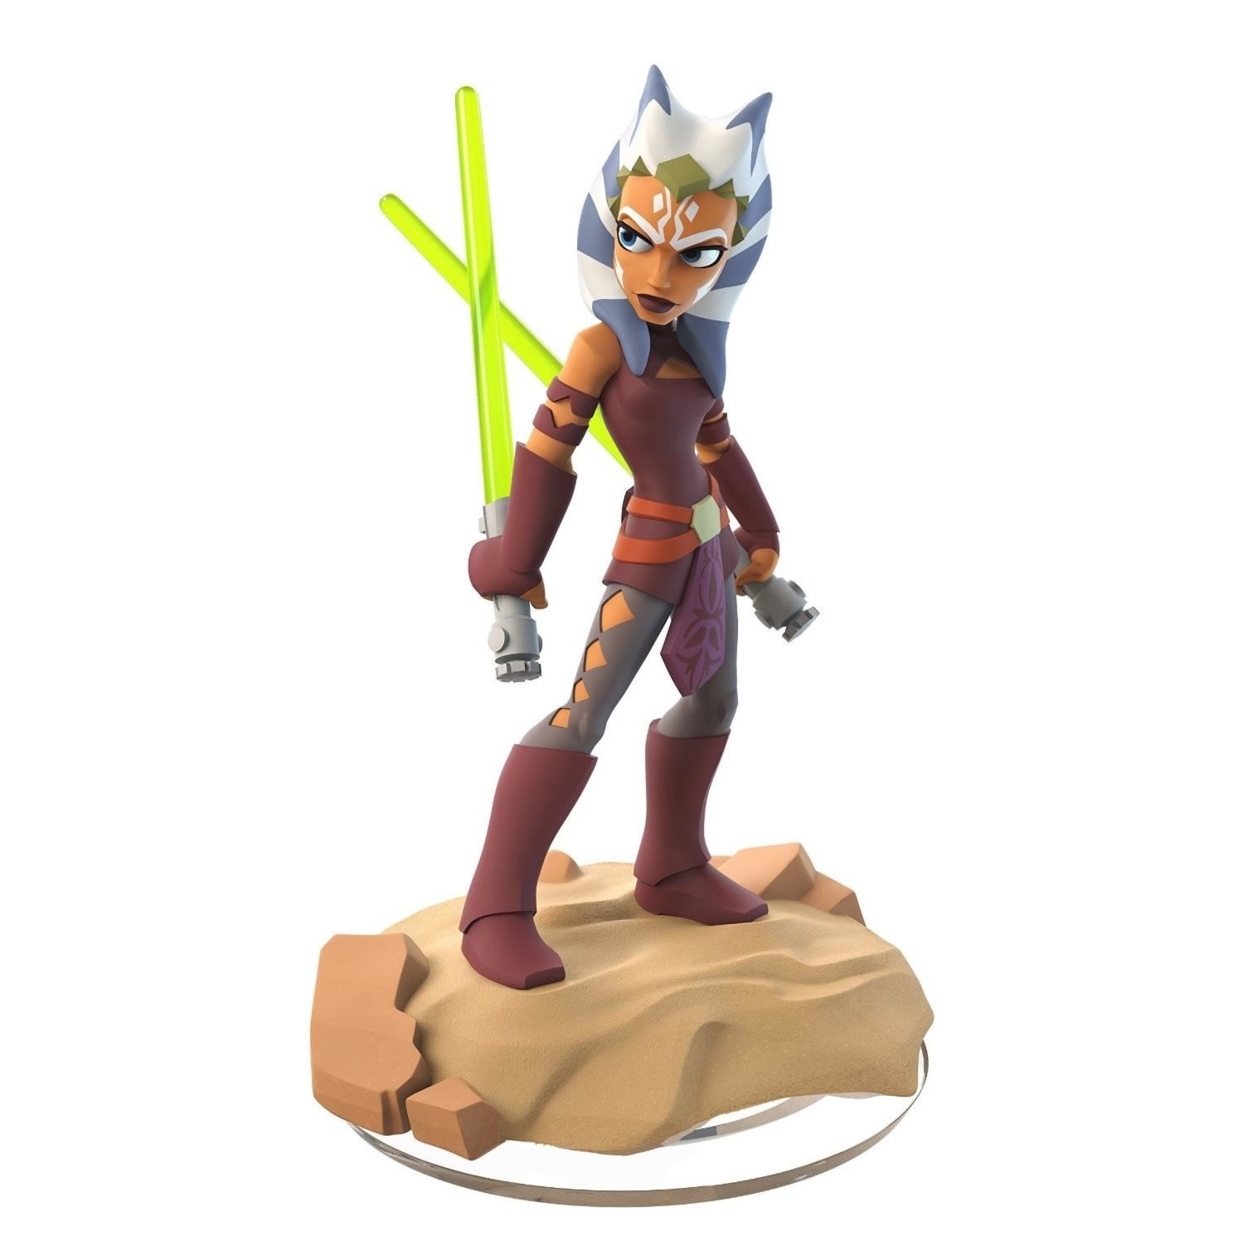 Disney Infinity 3.0 Edition Starter Pack (Xbox 360) - image 3 of 7